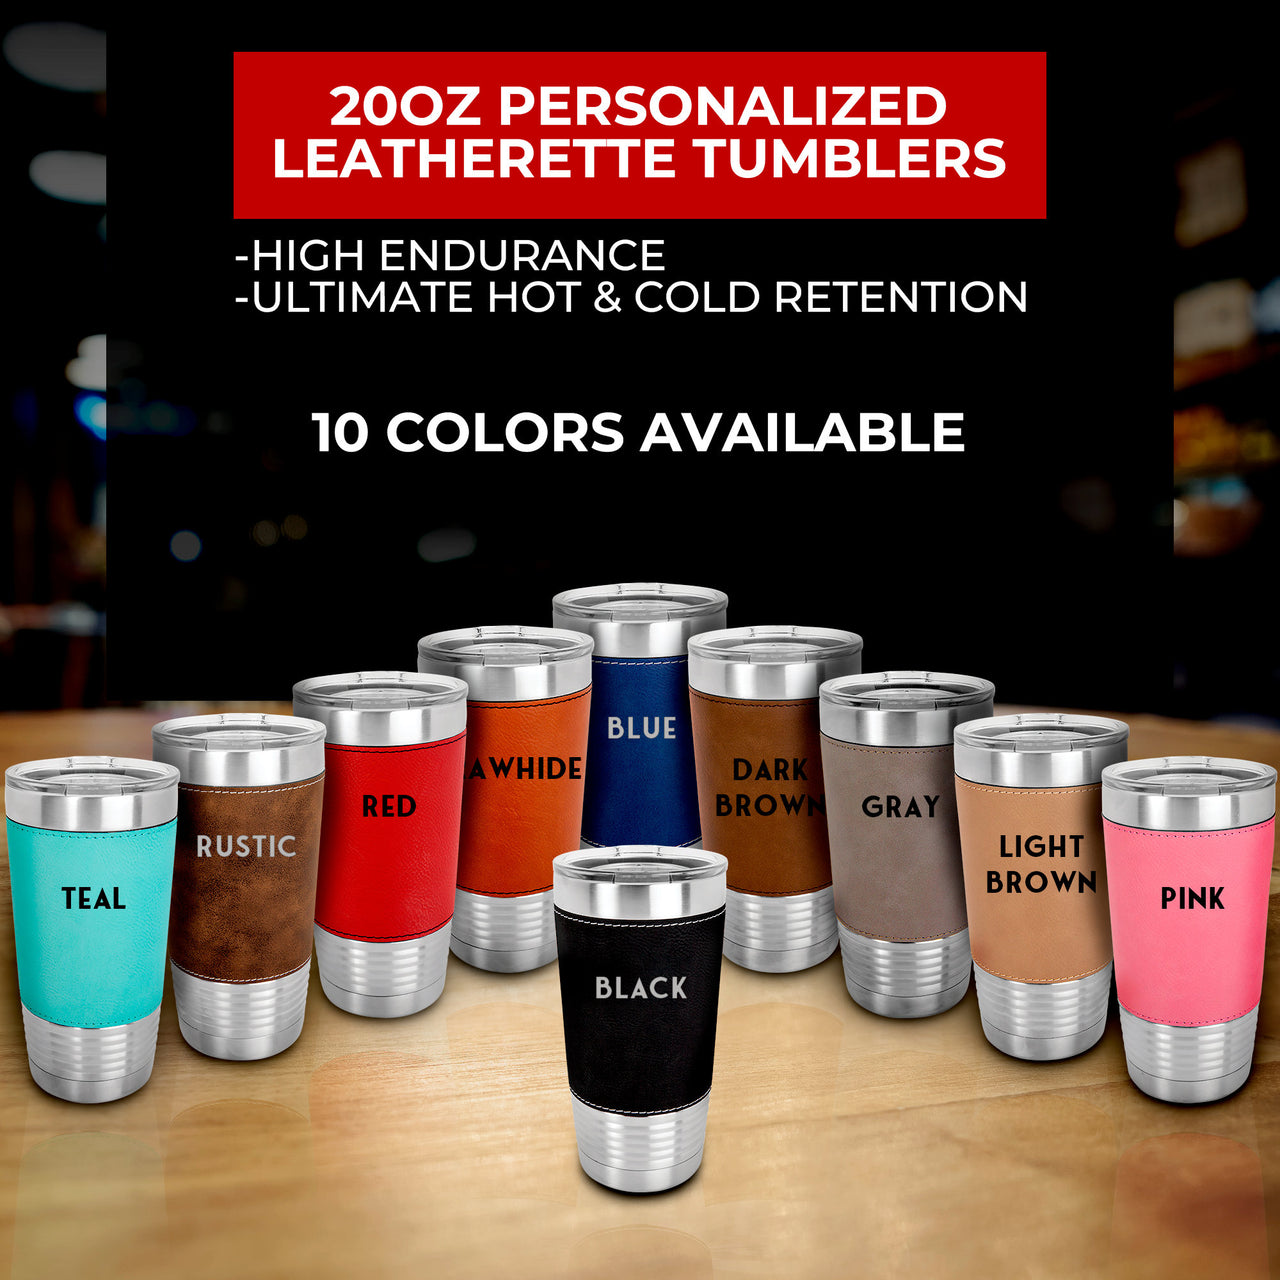 Personalized Bachelor Party Tumblers, Bachelor Party Gifts, Bachelor Party Favor Tumblers, Custom Tumbler Wedding Favors, Engraved Tumbler